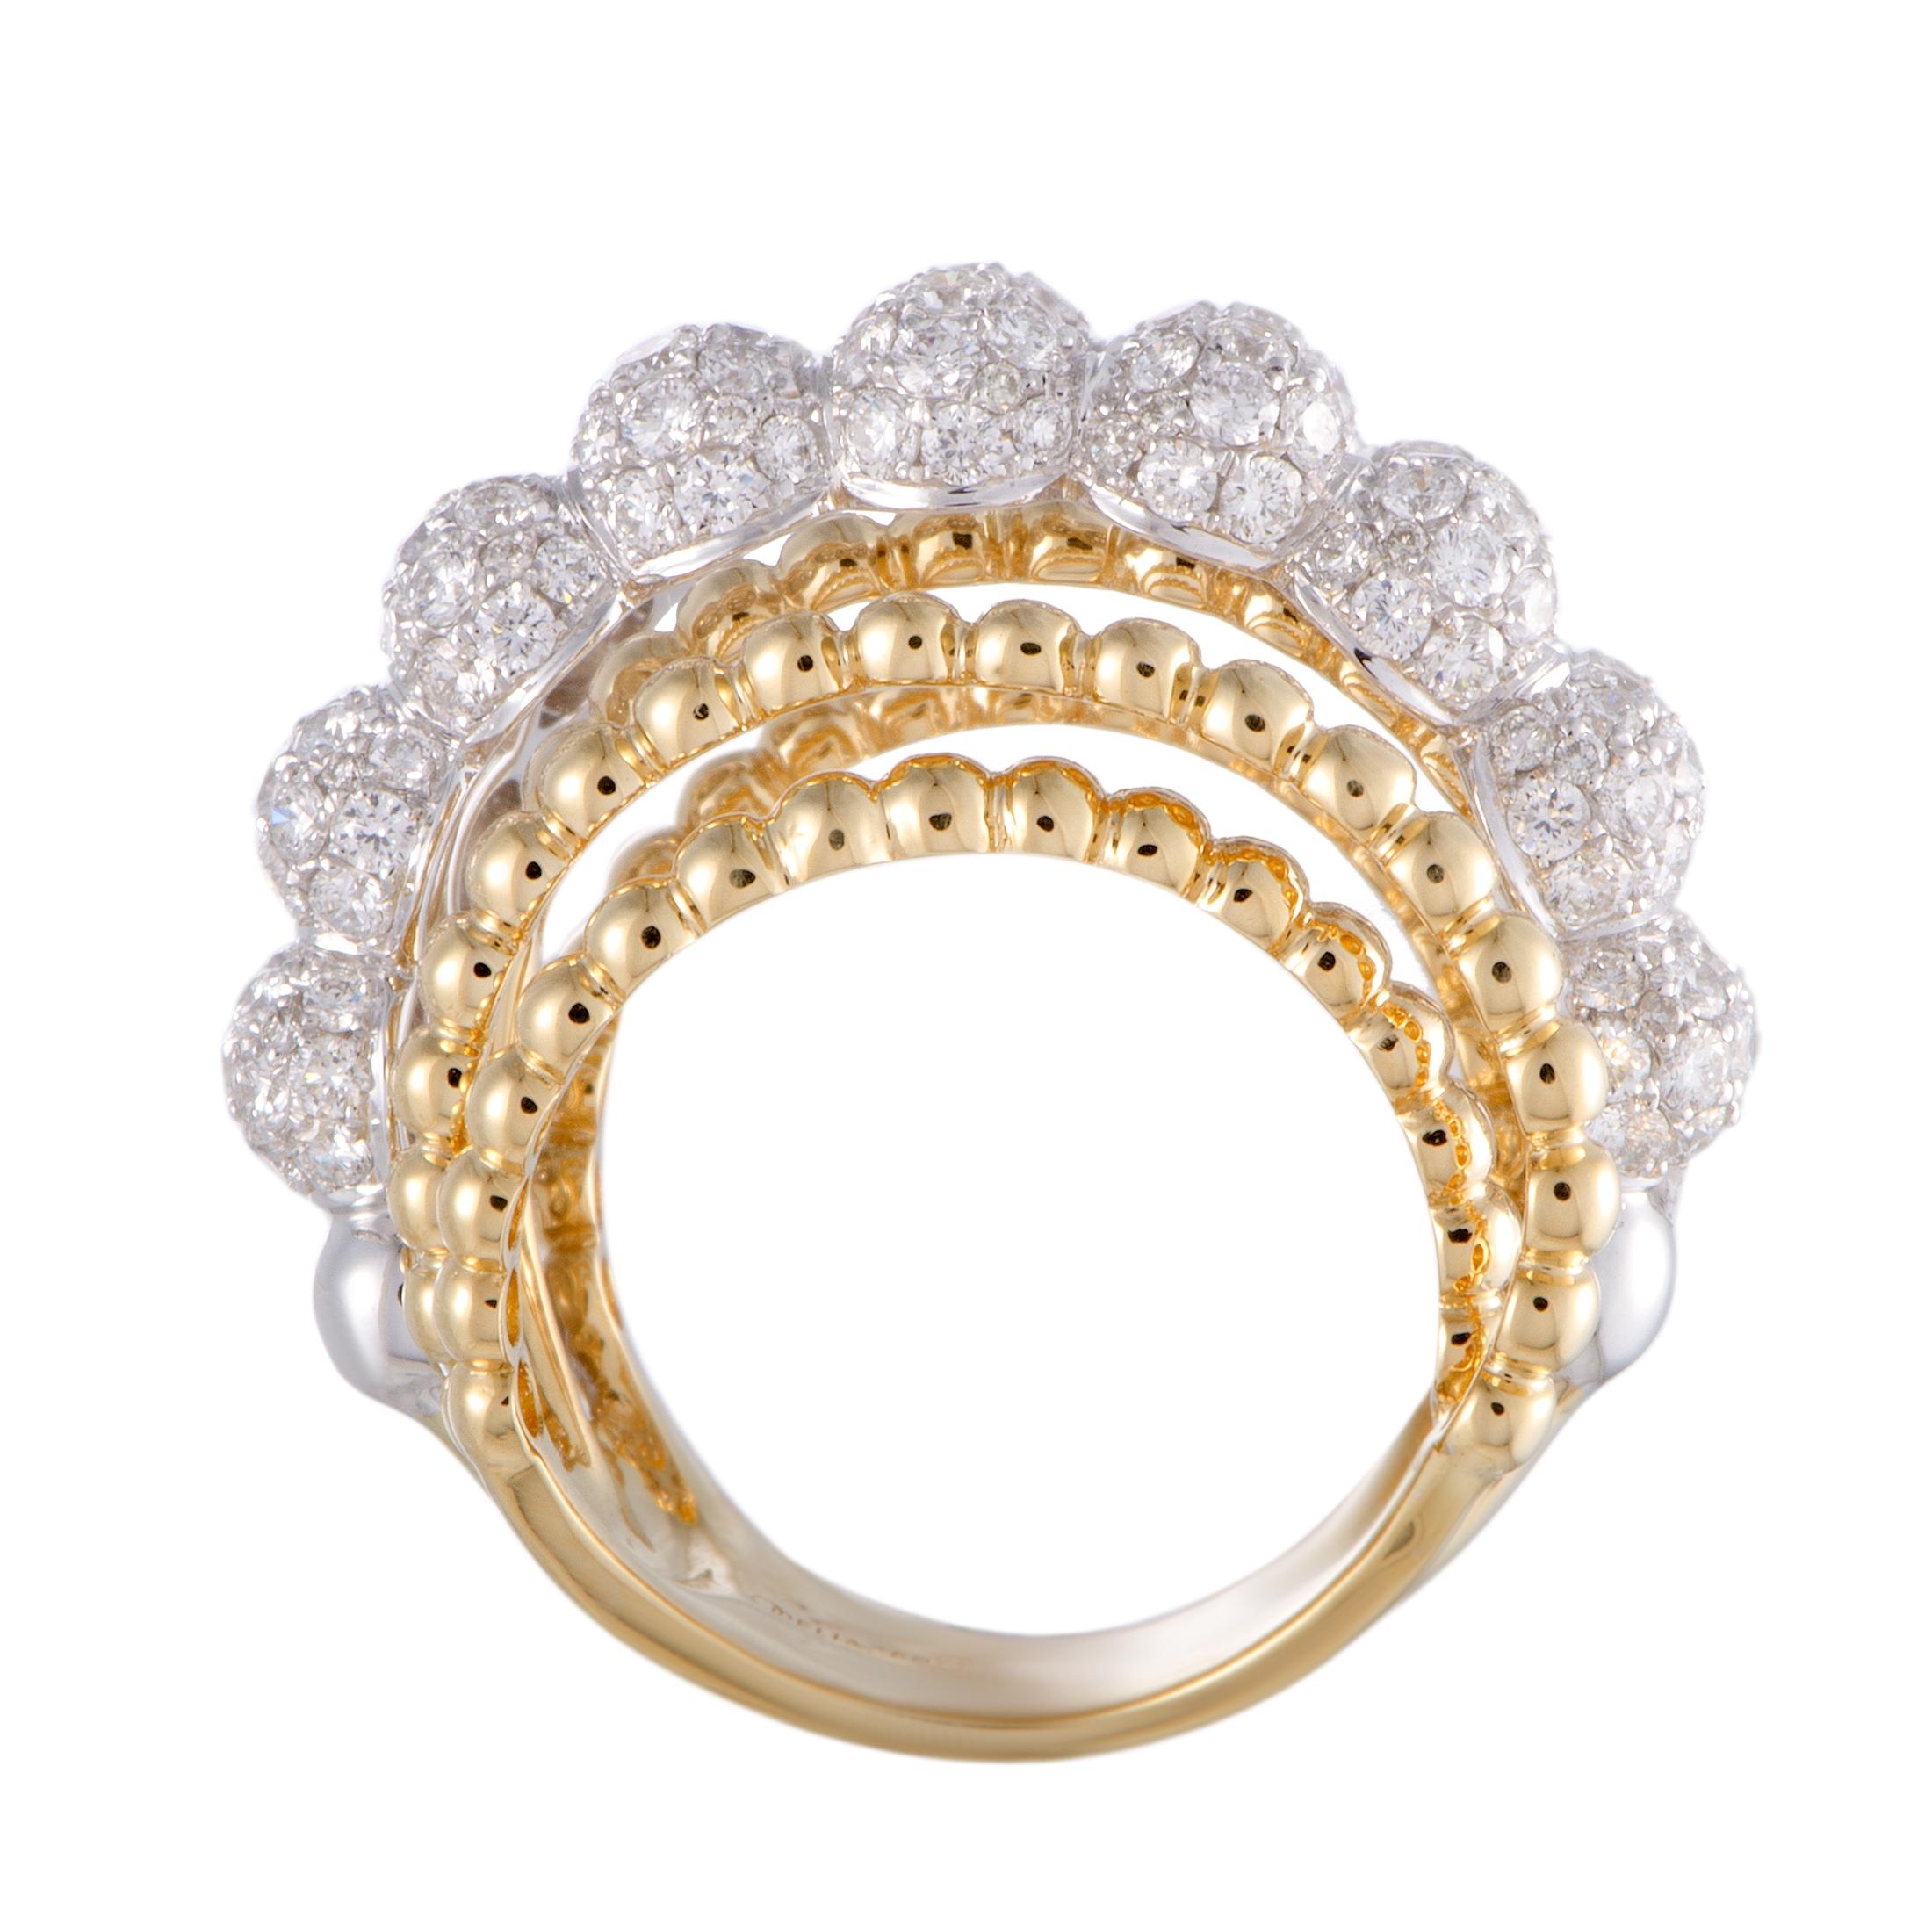 Wonderfully combining nifty beads of fabulous 18K yellow gold with gorgeously resplendent and simply astonishing clusters of diamond brilliance upon perfectly complementing 18K white gold, this magnificent ring from  produces an eye-catching and